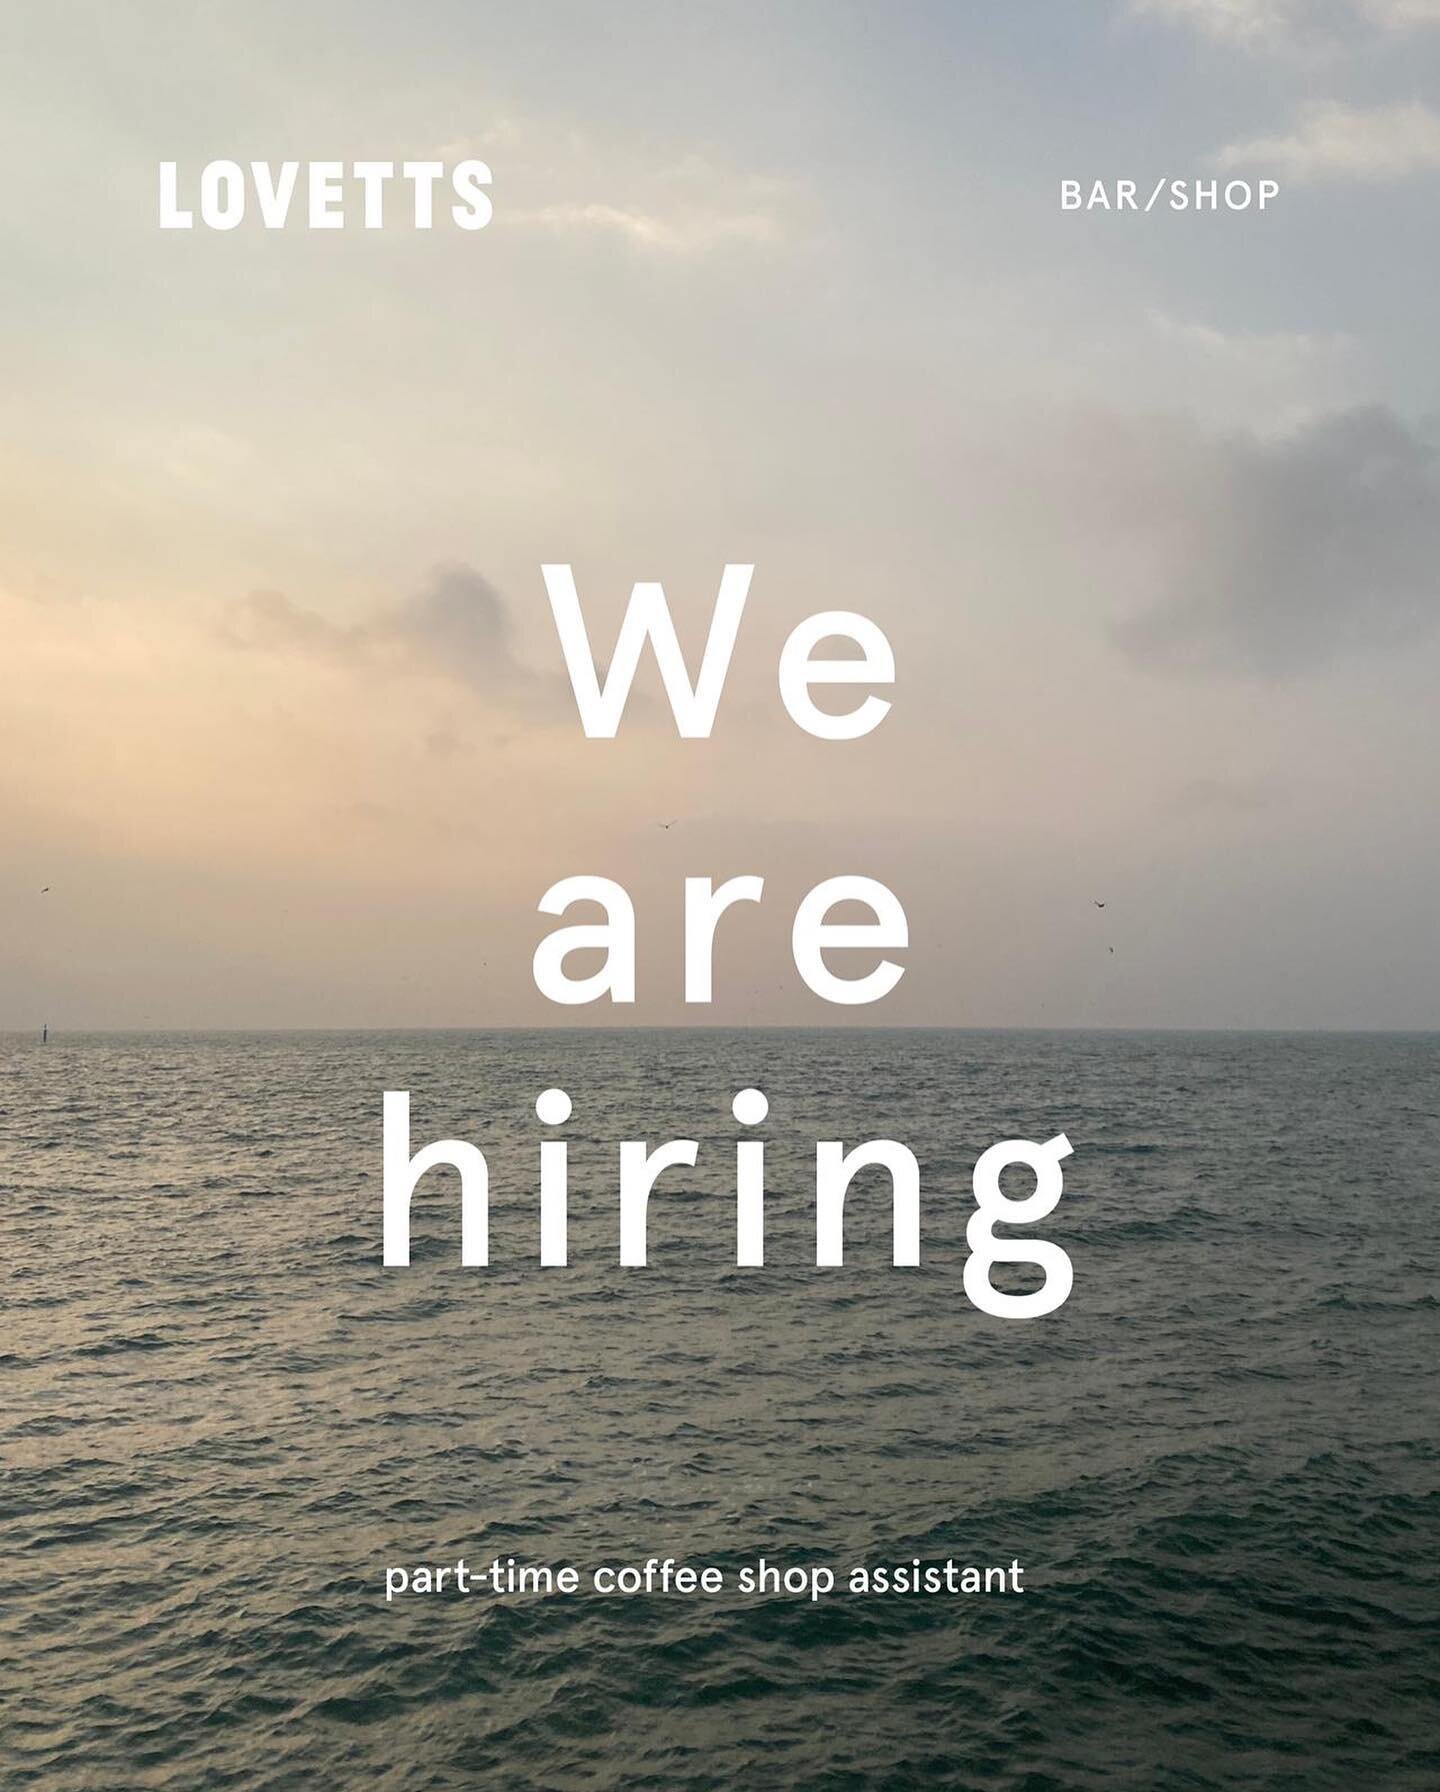 WORK WITH US!⁣
⁣
We&rsquo;re on the lookout for a part-time coffee shop assistant. Flexible hours working in a small, friendly team. Hospitality experience preferred, but not essential if you are willing to get stuck in and have a passion for great f